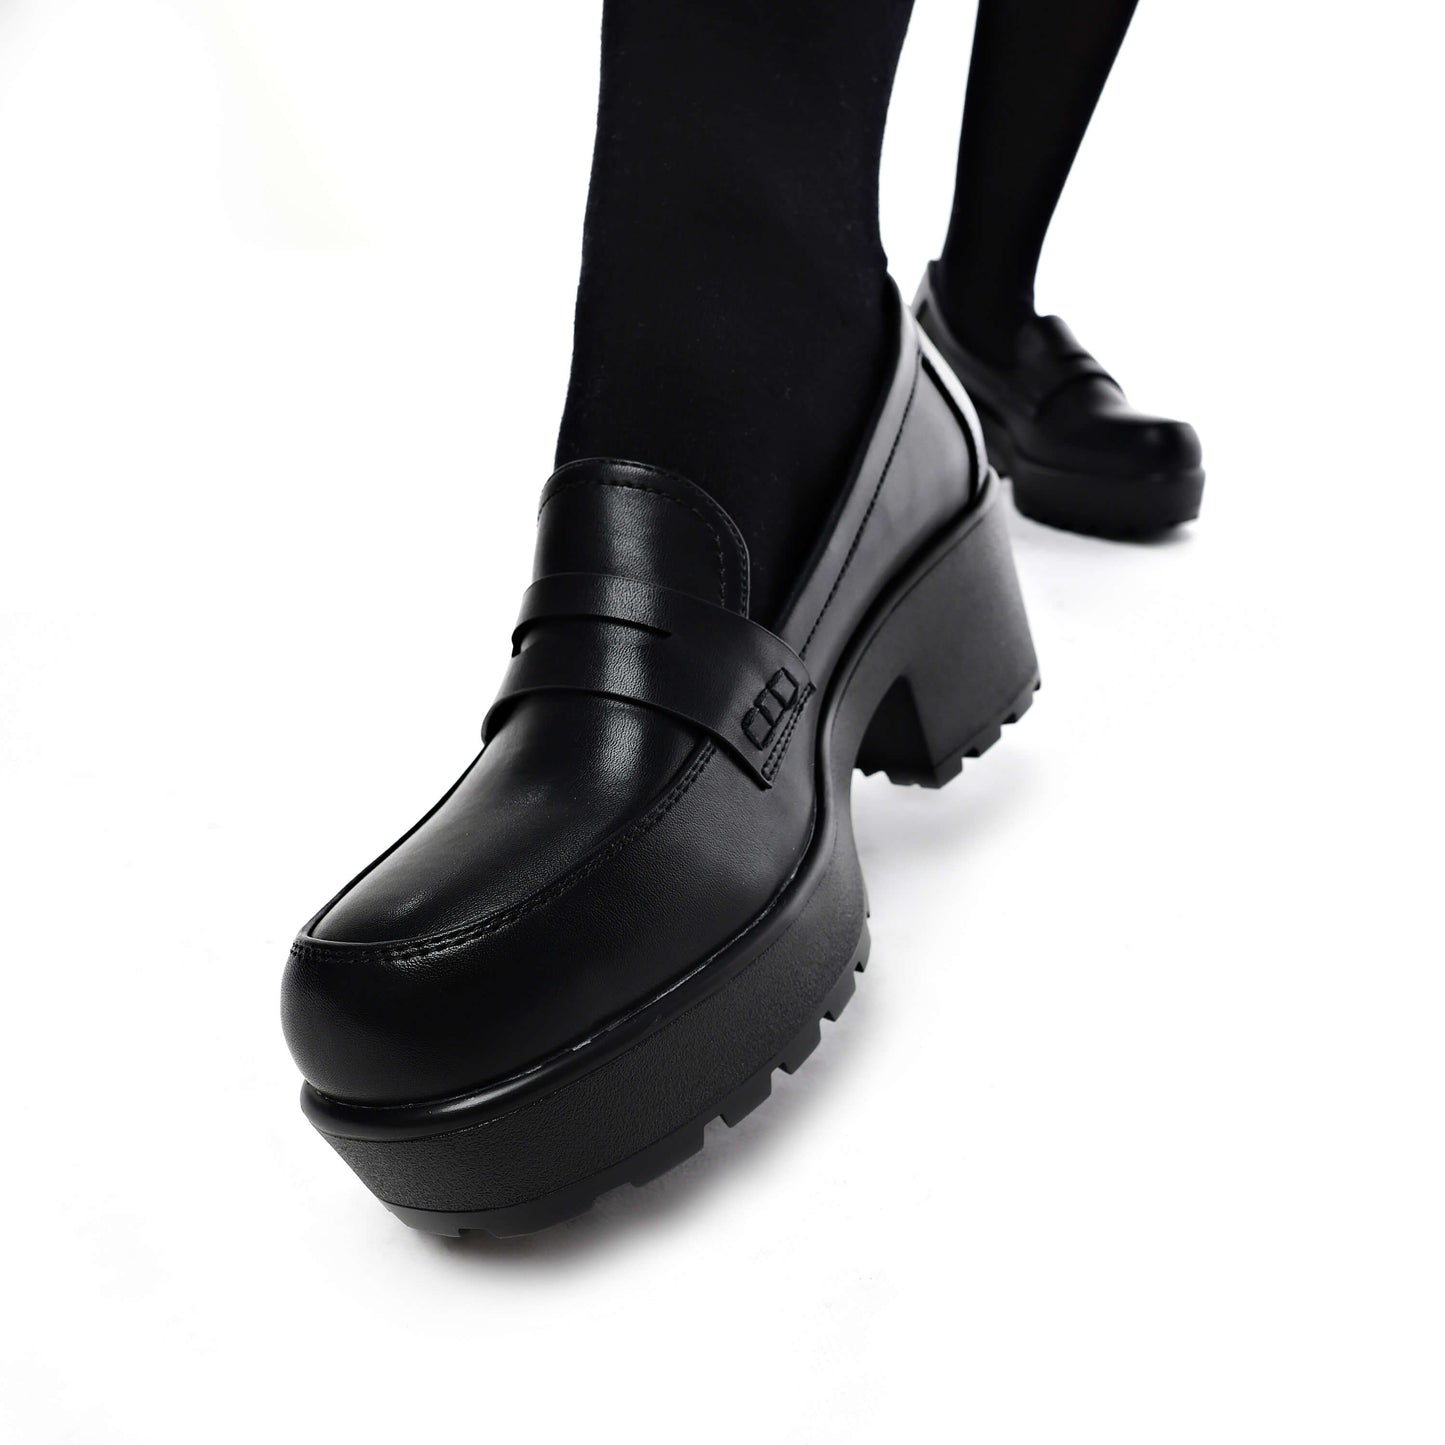 Vigo Classic Chunky Shoes - Shoes - KOI Footwear - Black - Model Side and Front View